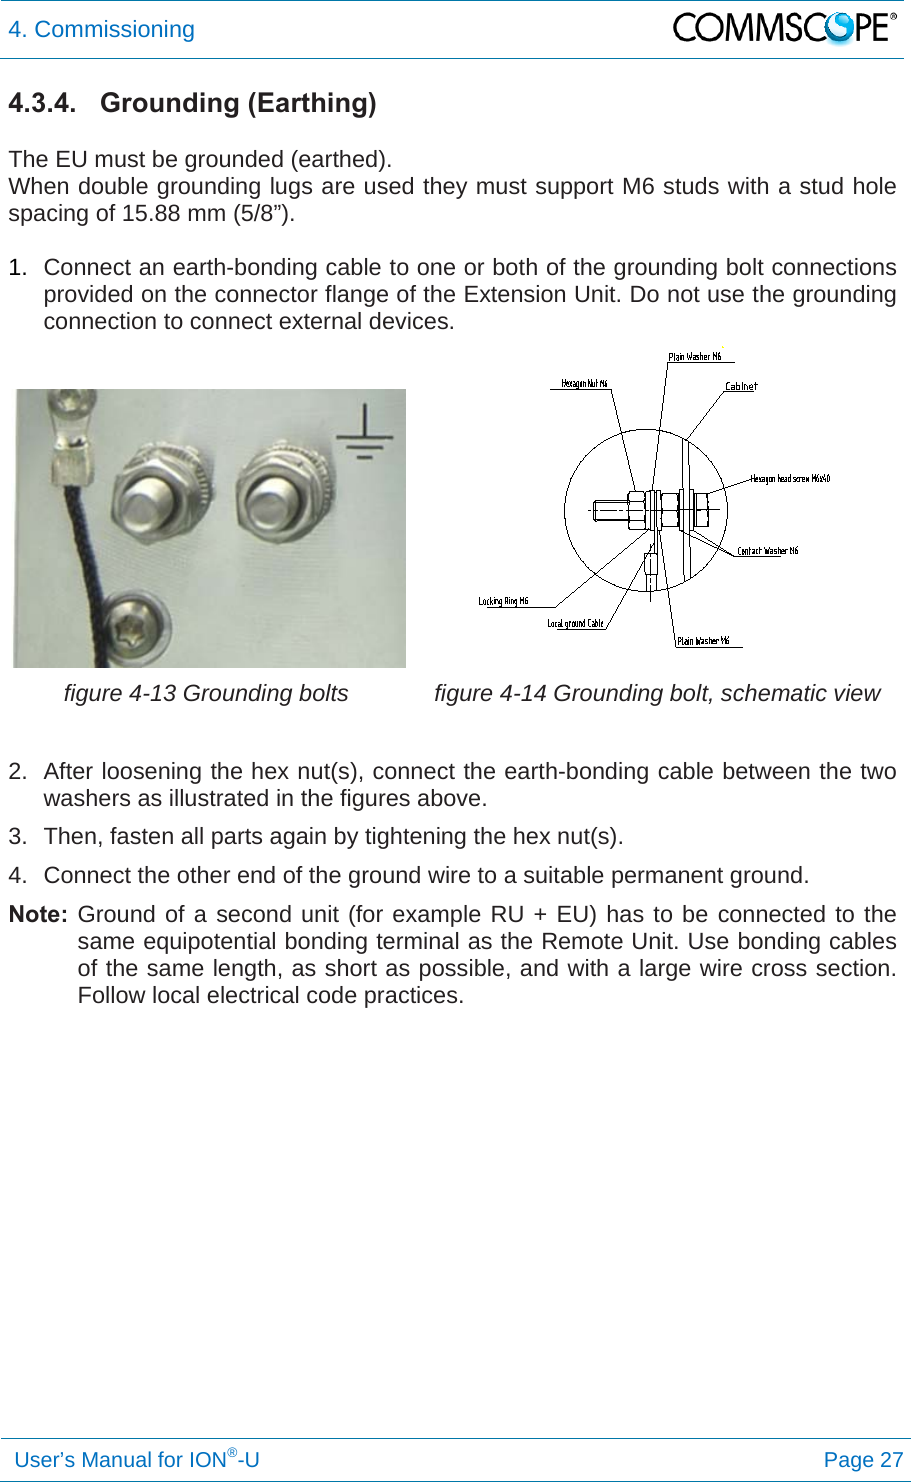 4. Commissioning   User’s Manual for ION®-U Page 27 4.3.4. Grounding (Earthing)  The EU must be grounded (earthed). When double grounding lugs are used they must support M6 studs with a stud hole spacing of 15.88 mm (5/8”).  1.  Connect an earth-bonding cable to one or both of the grounding bolt connections provided on the connector flange of the Extension Unit. Do not use the grounding connection to connect external devices. figure 4-13 Grounding bolts  figure 4-14 Grounding bolt, schematic view  2.  After loosening the hex nut(s), connect the earth-bonding cable between the two washers as illustrated in the figures above. 3.  Then, fasten all parts again by tightening the hex nut(s). 4.  Connect the other end of the ground wire to a suitable permanent ground. Note: Ground of a second unit (for example RU + EU) has to be connected to the same equipotential bonding terminal as the Remote Unit. Use bonding cables of the same length, as short as possible, and with a large wire cross section. Follow local electrical code practices.   